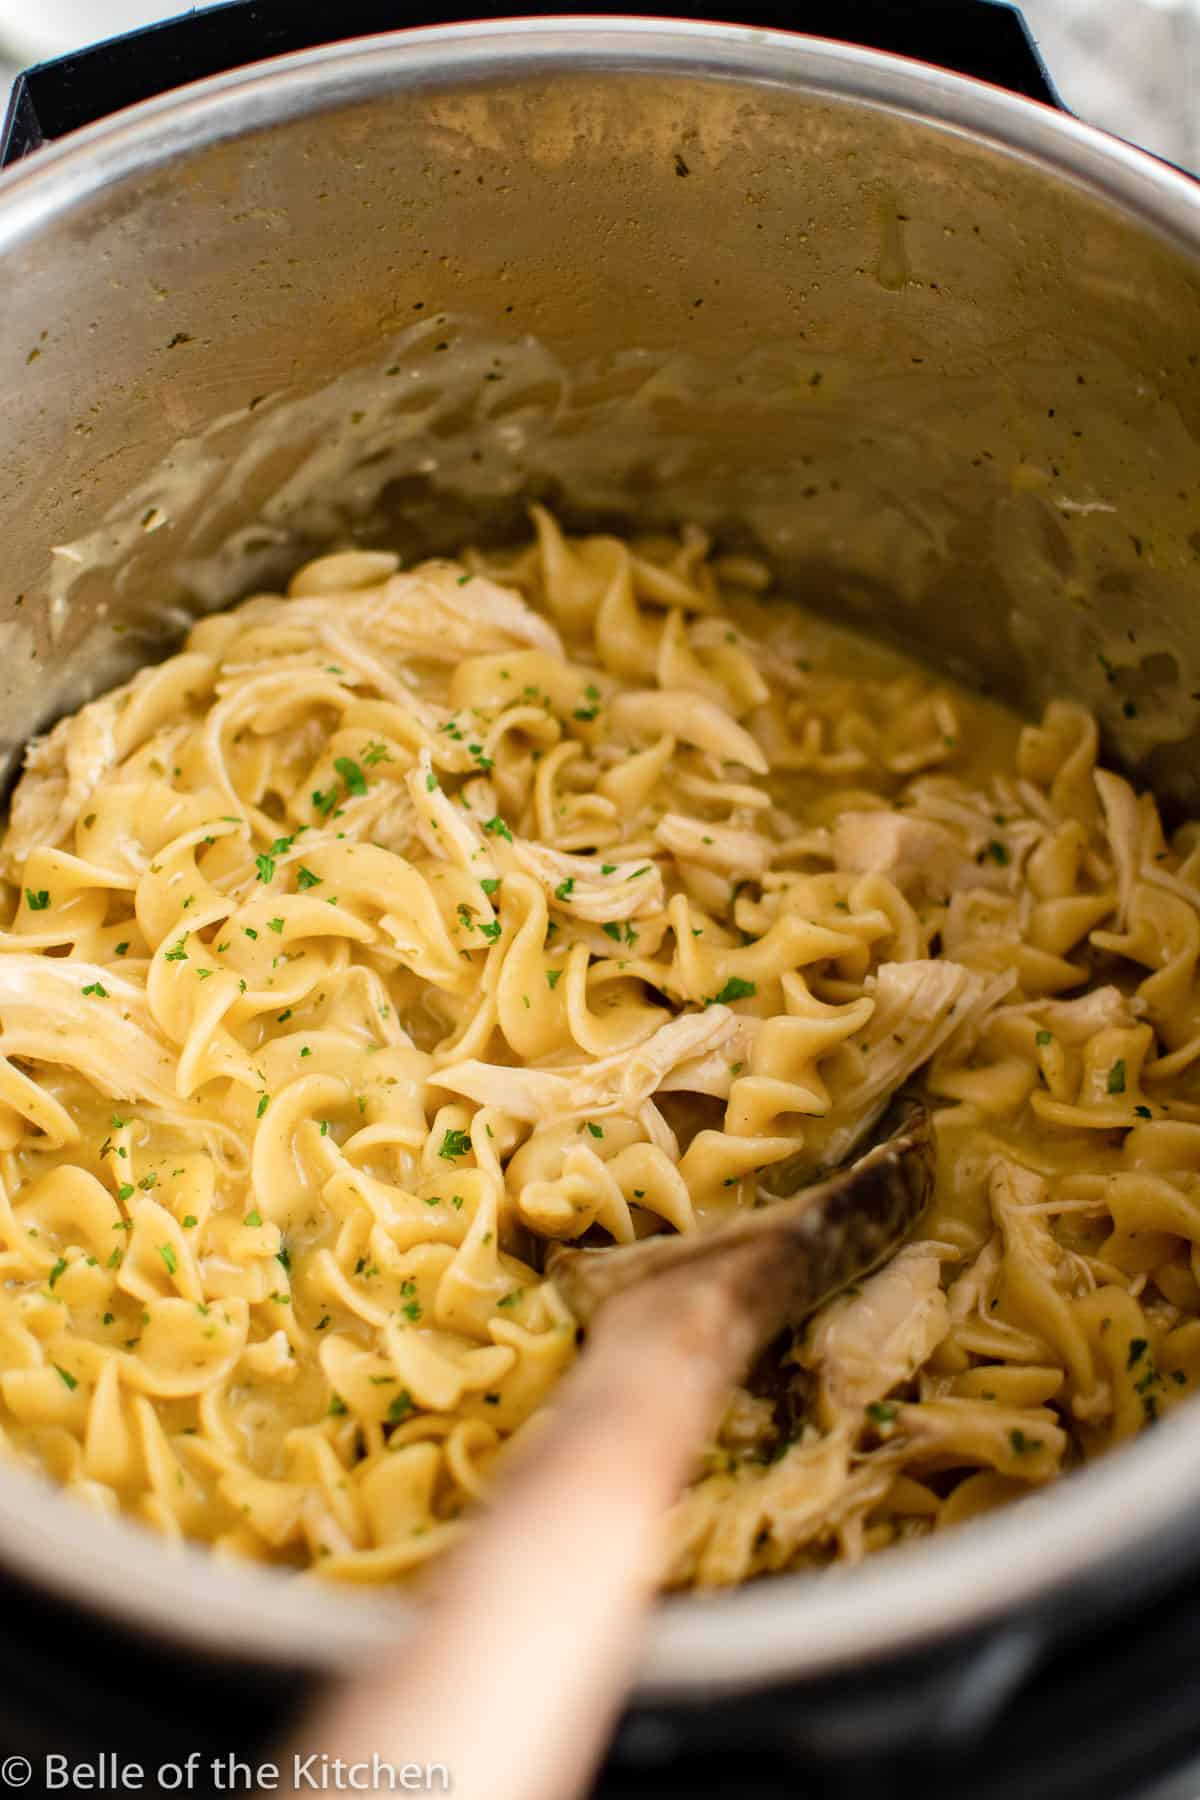 an Instant Pot full of chicken and noodles with a wooden spoon.